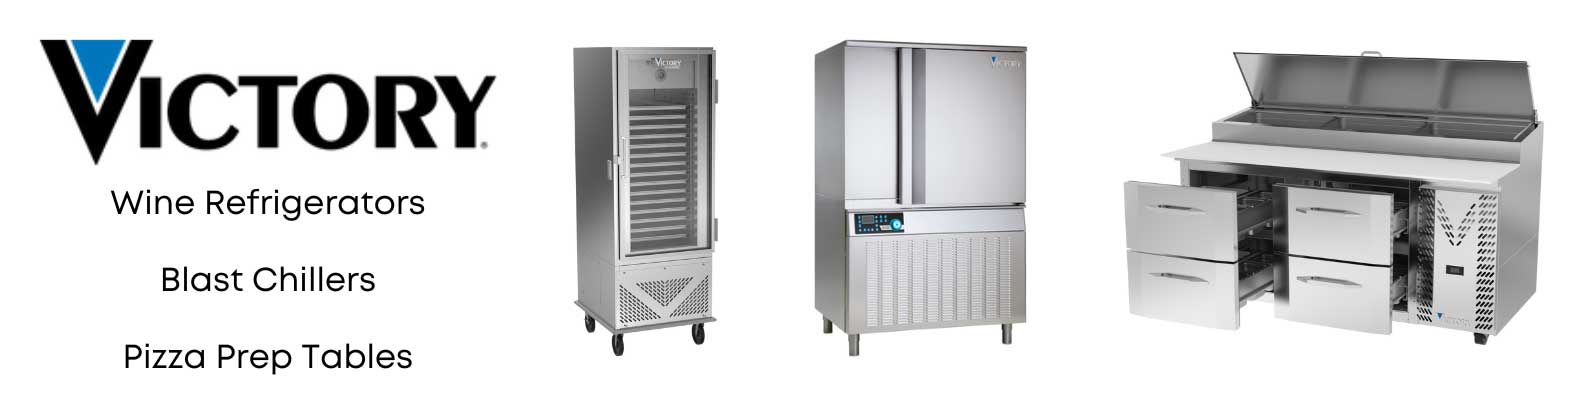 Victory Refrigeration: Precision and Performance